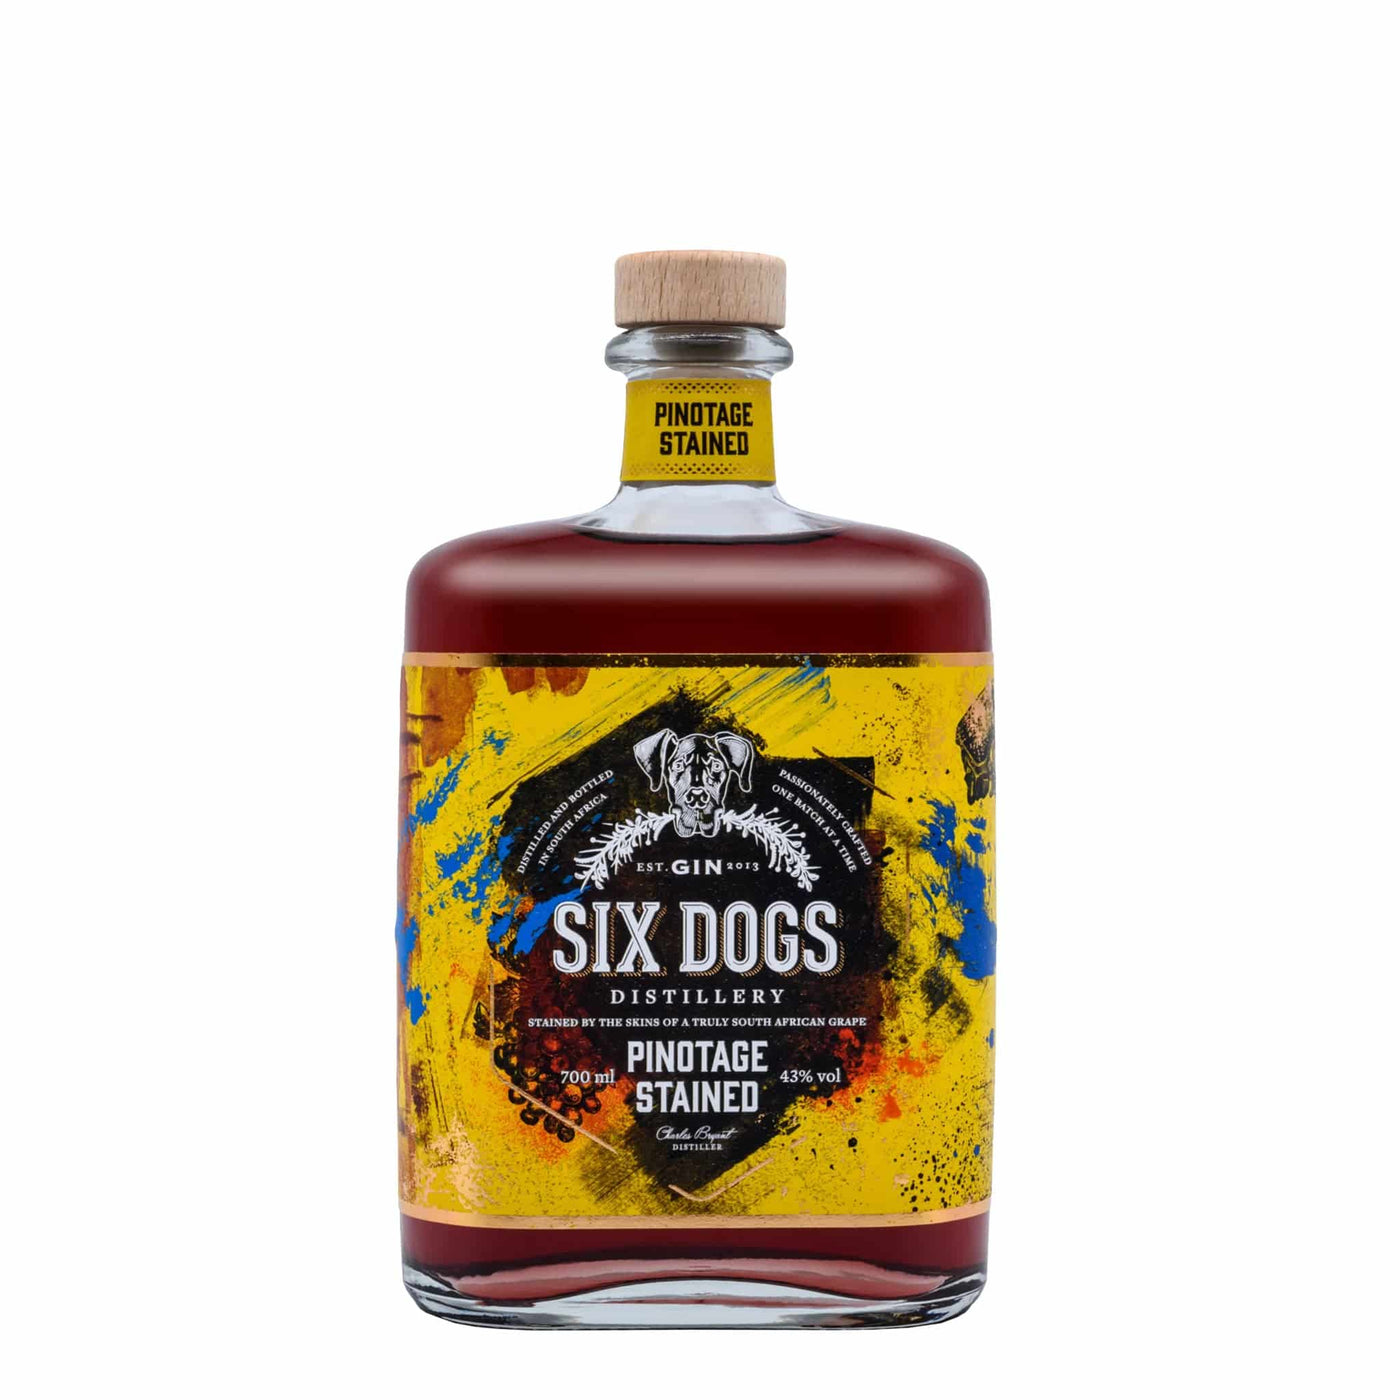 Six Dogs Pinotage Stained Gin - Spiritly